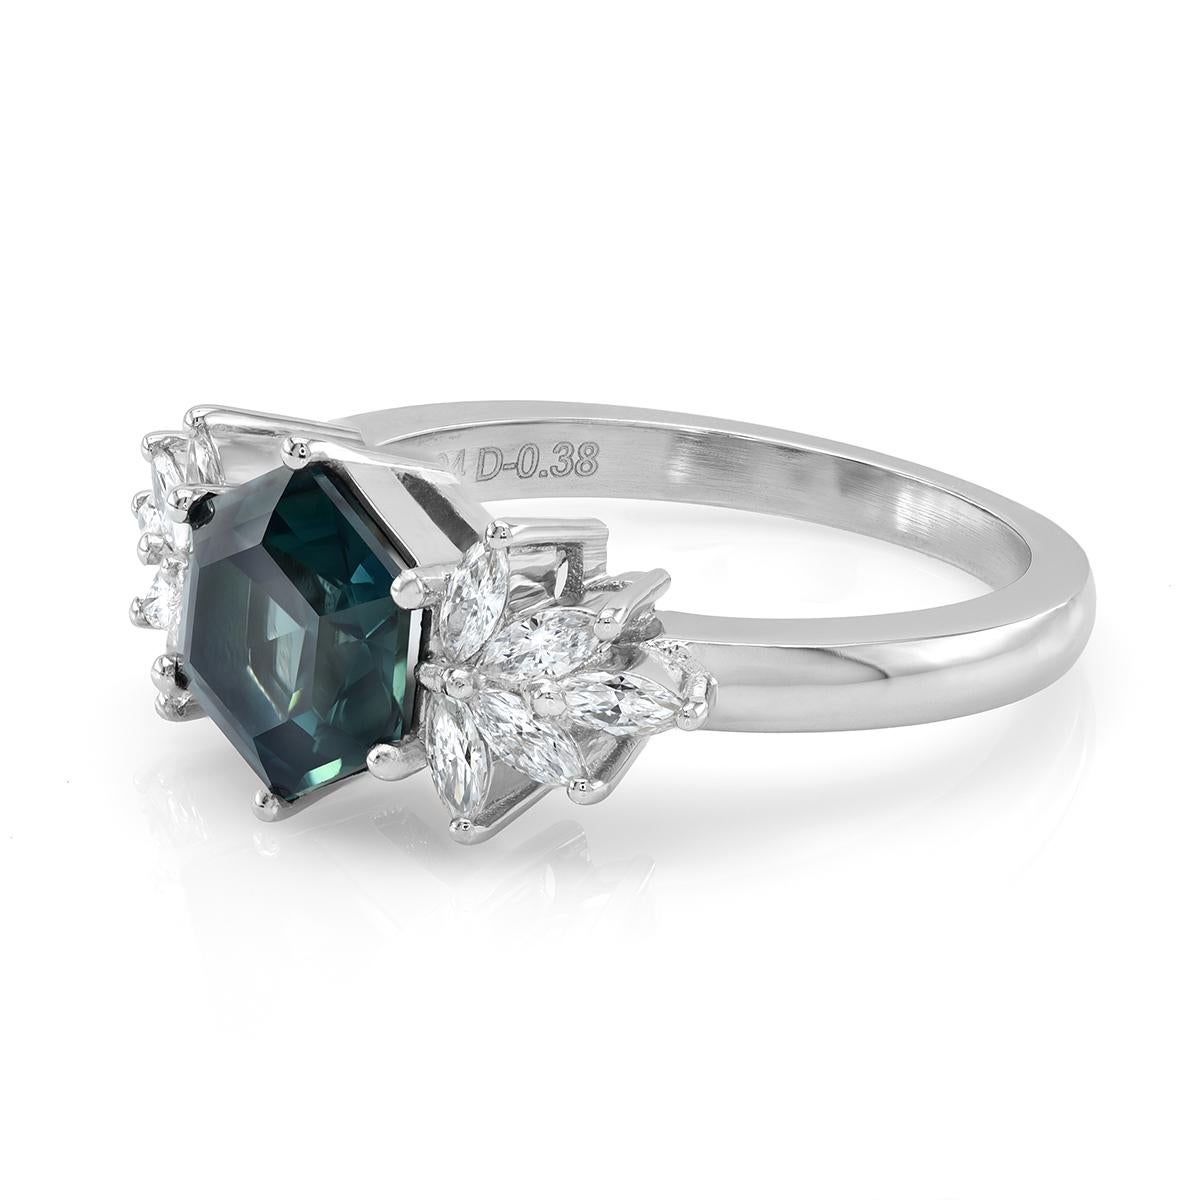 Mixed Cut GIA Certified 2.04 Carats Green Sapphire Diamonds set in Platinum Ring For Sale